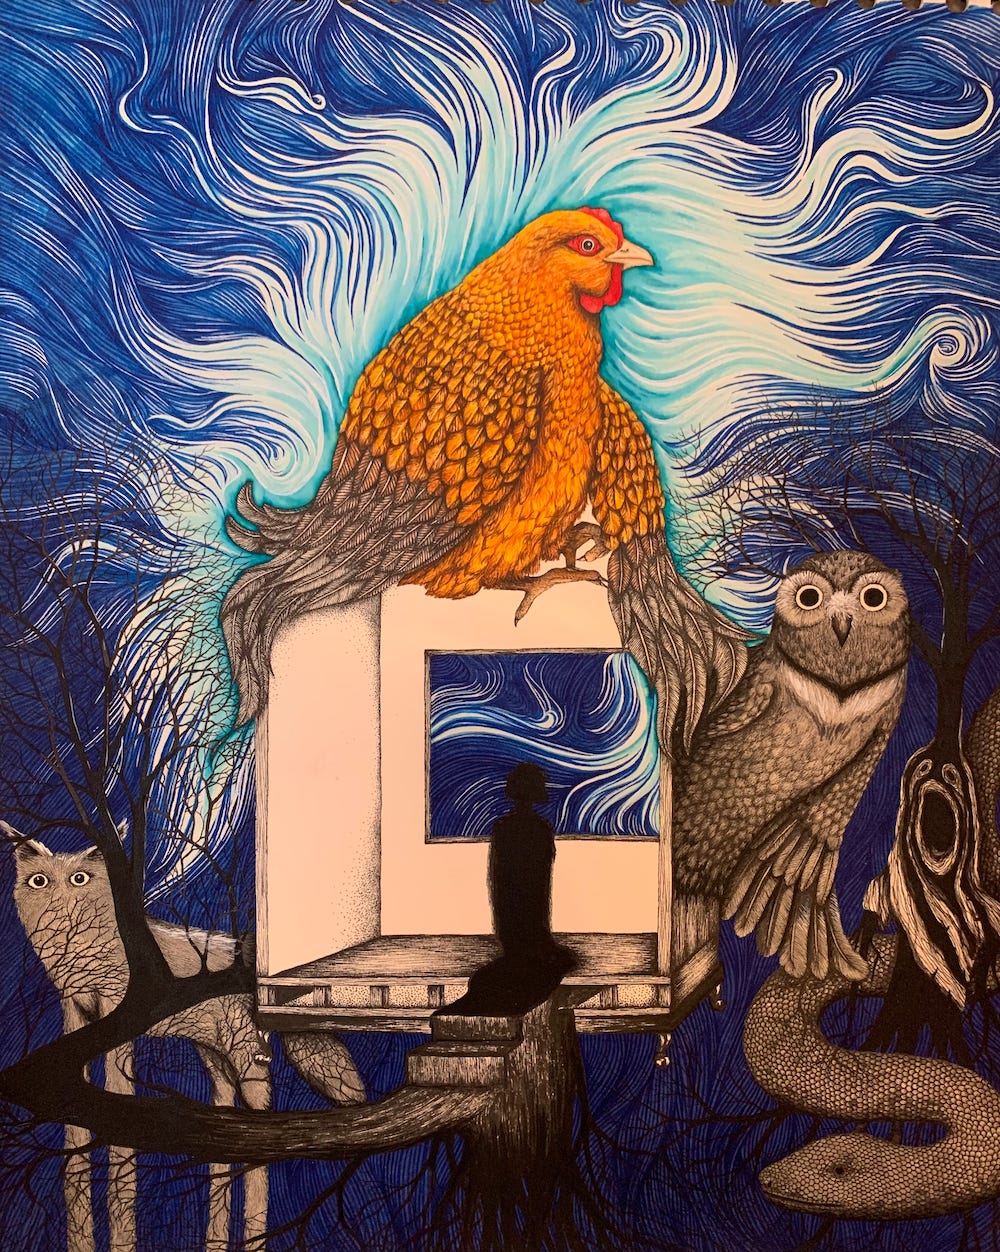 How do I describe this one? It's a very bright orange chicken with a psychedelic background of blue swirling lines, roosting over a room with a shadow figure that looks out into the background, with trees and monsters on either side of the room.